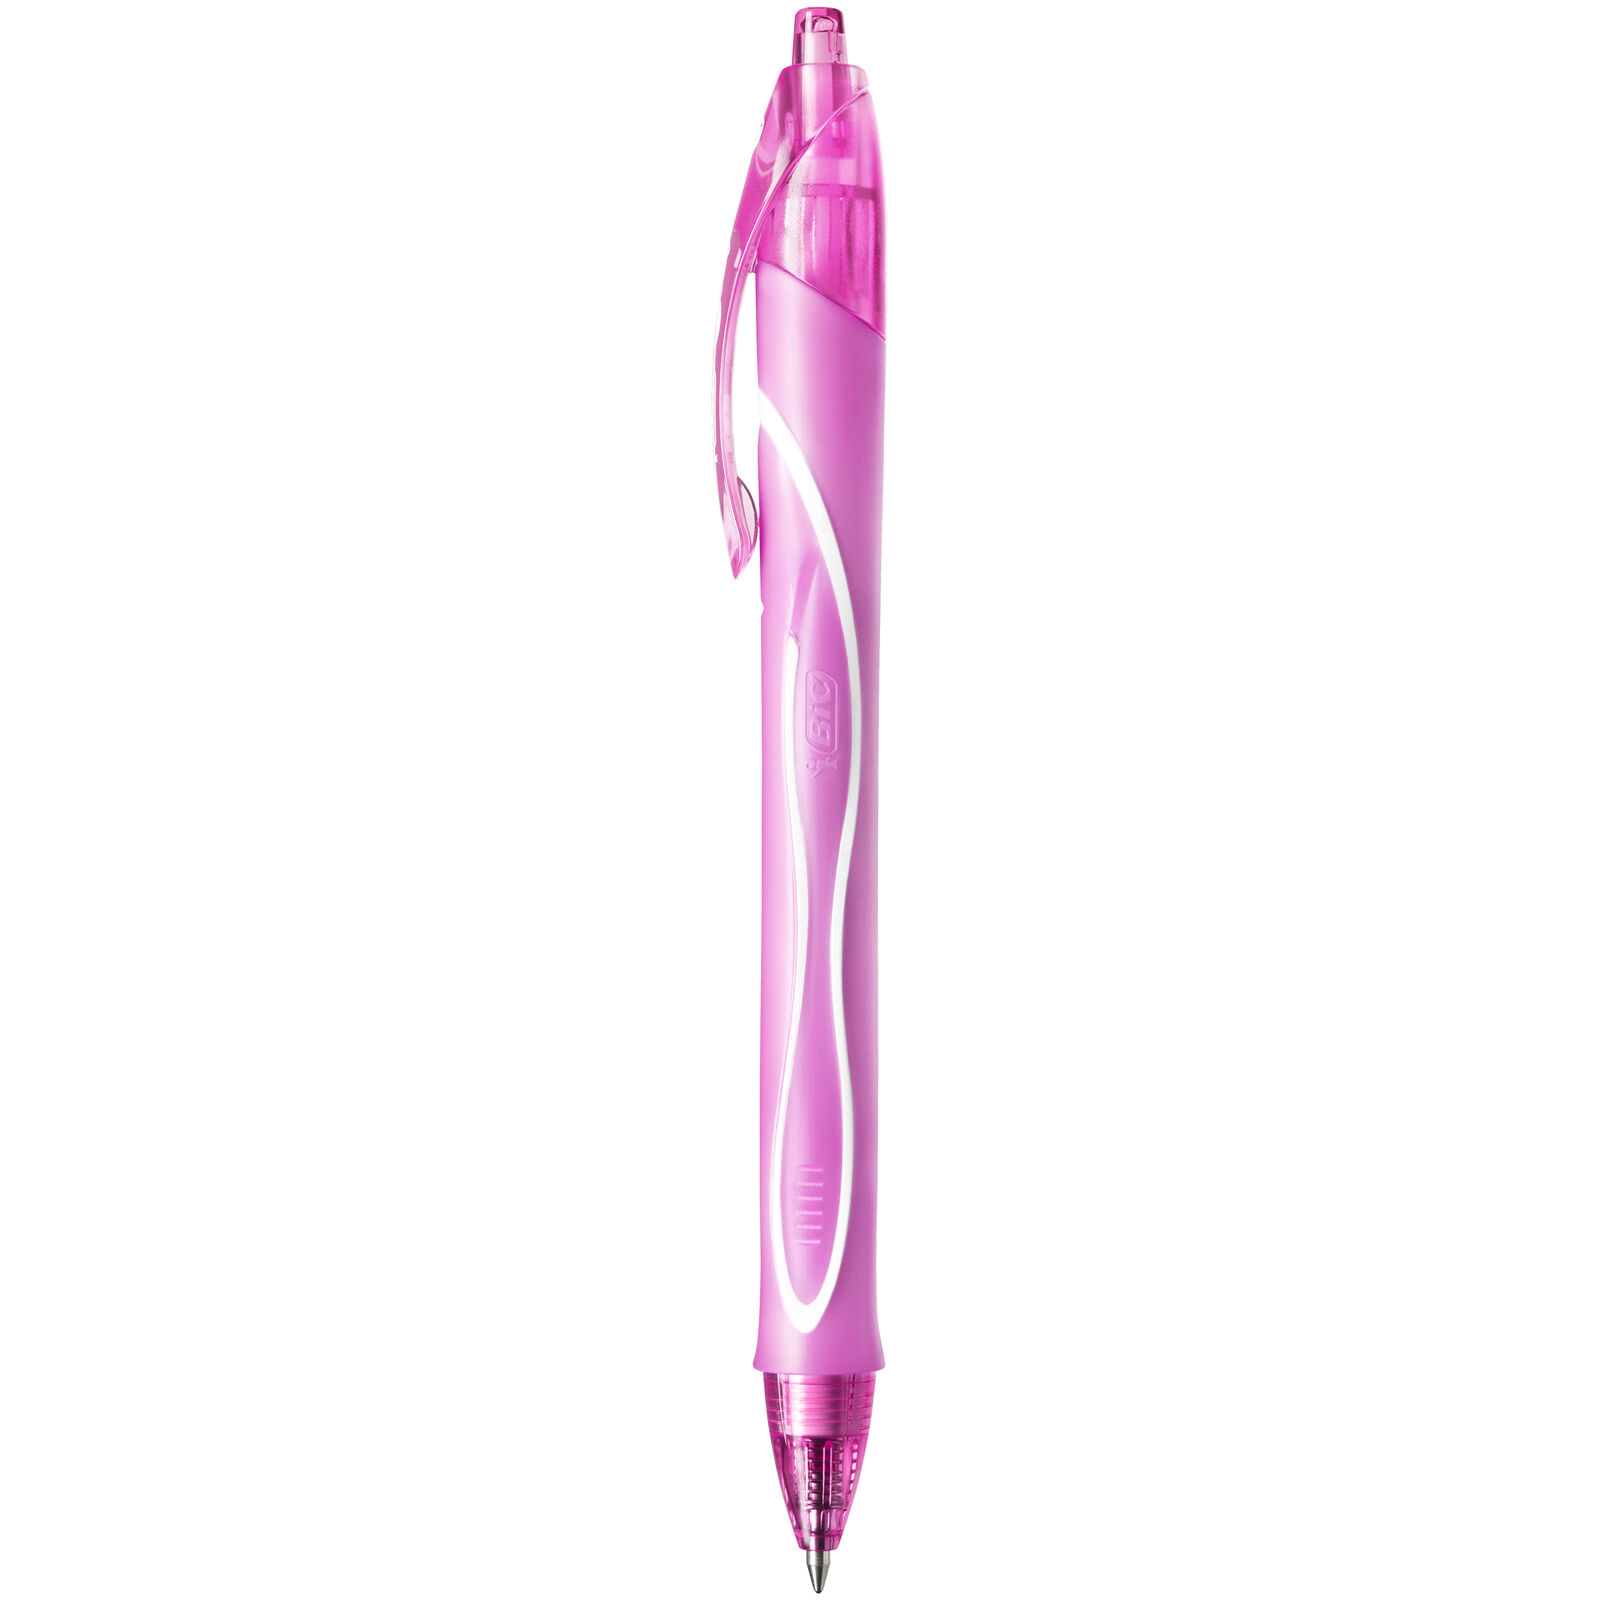 Stylo-bille rétractable Bic Gelocity Quick Dry rose